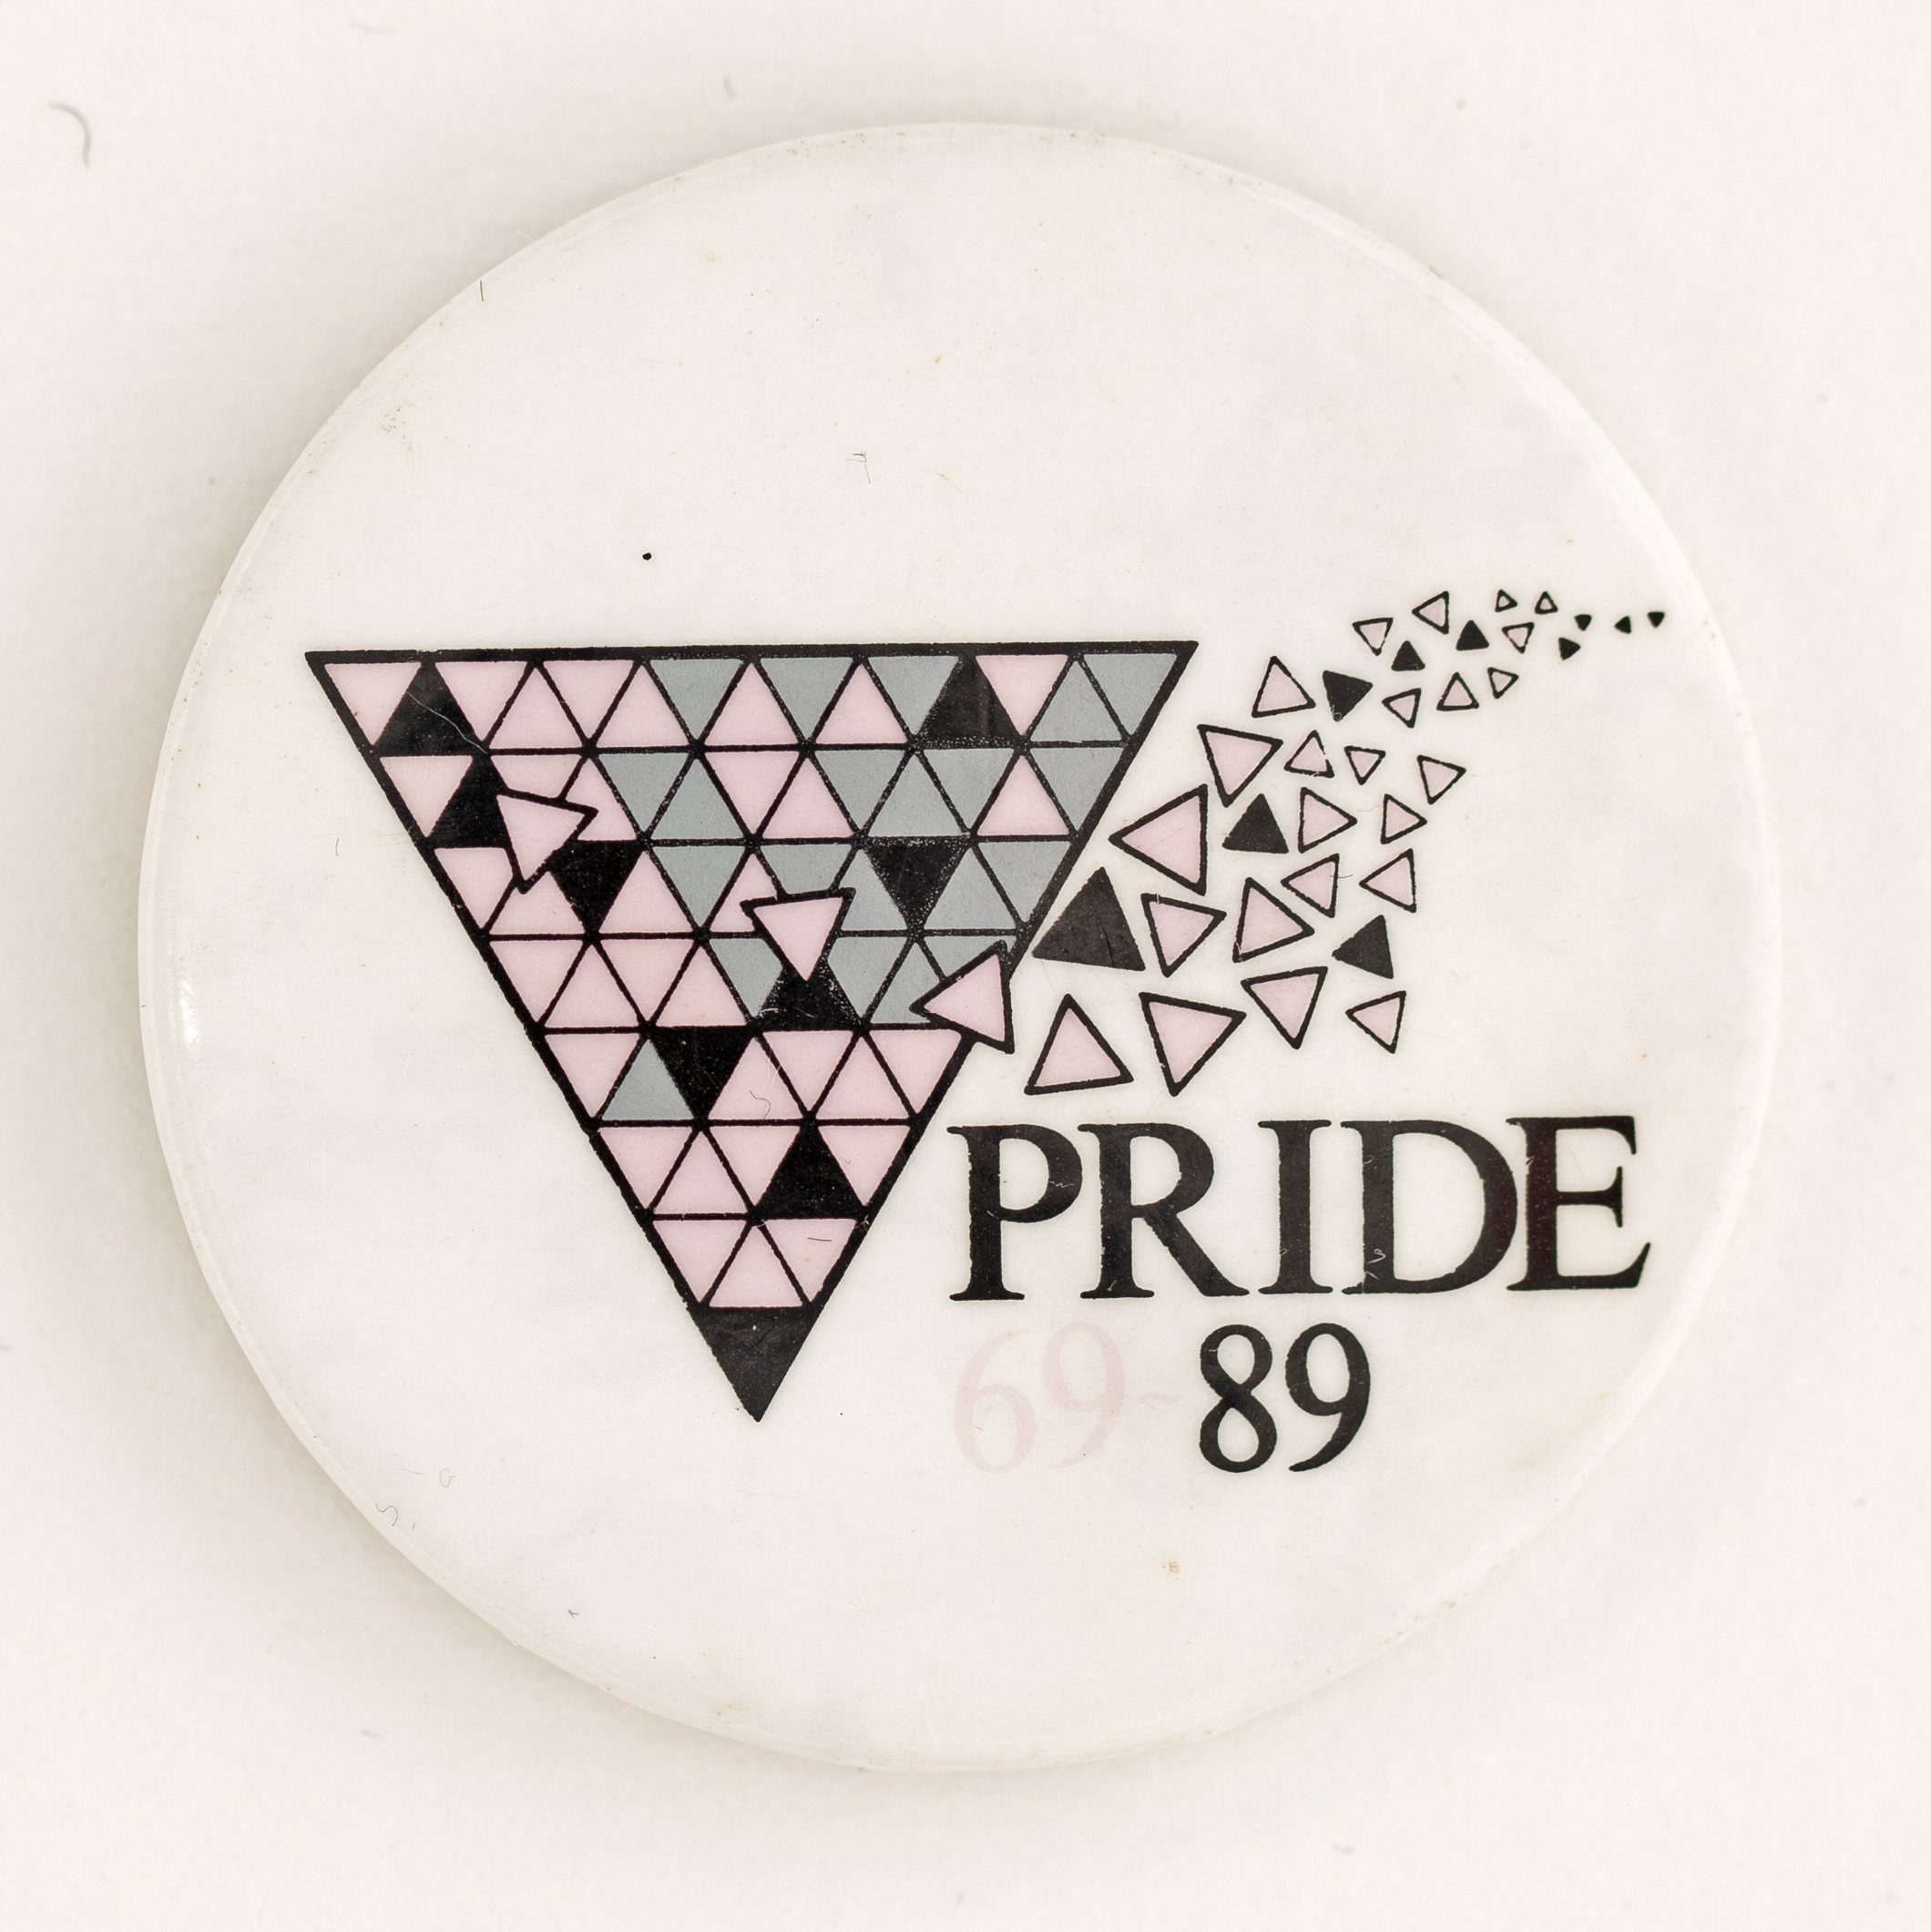 A white badge with a downwards facing triangle filled with lots of smaller pink, grey, and black triangles. Text reads 'Pride 69 89'.